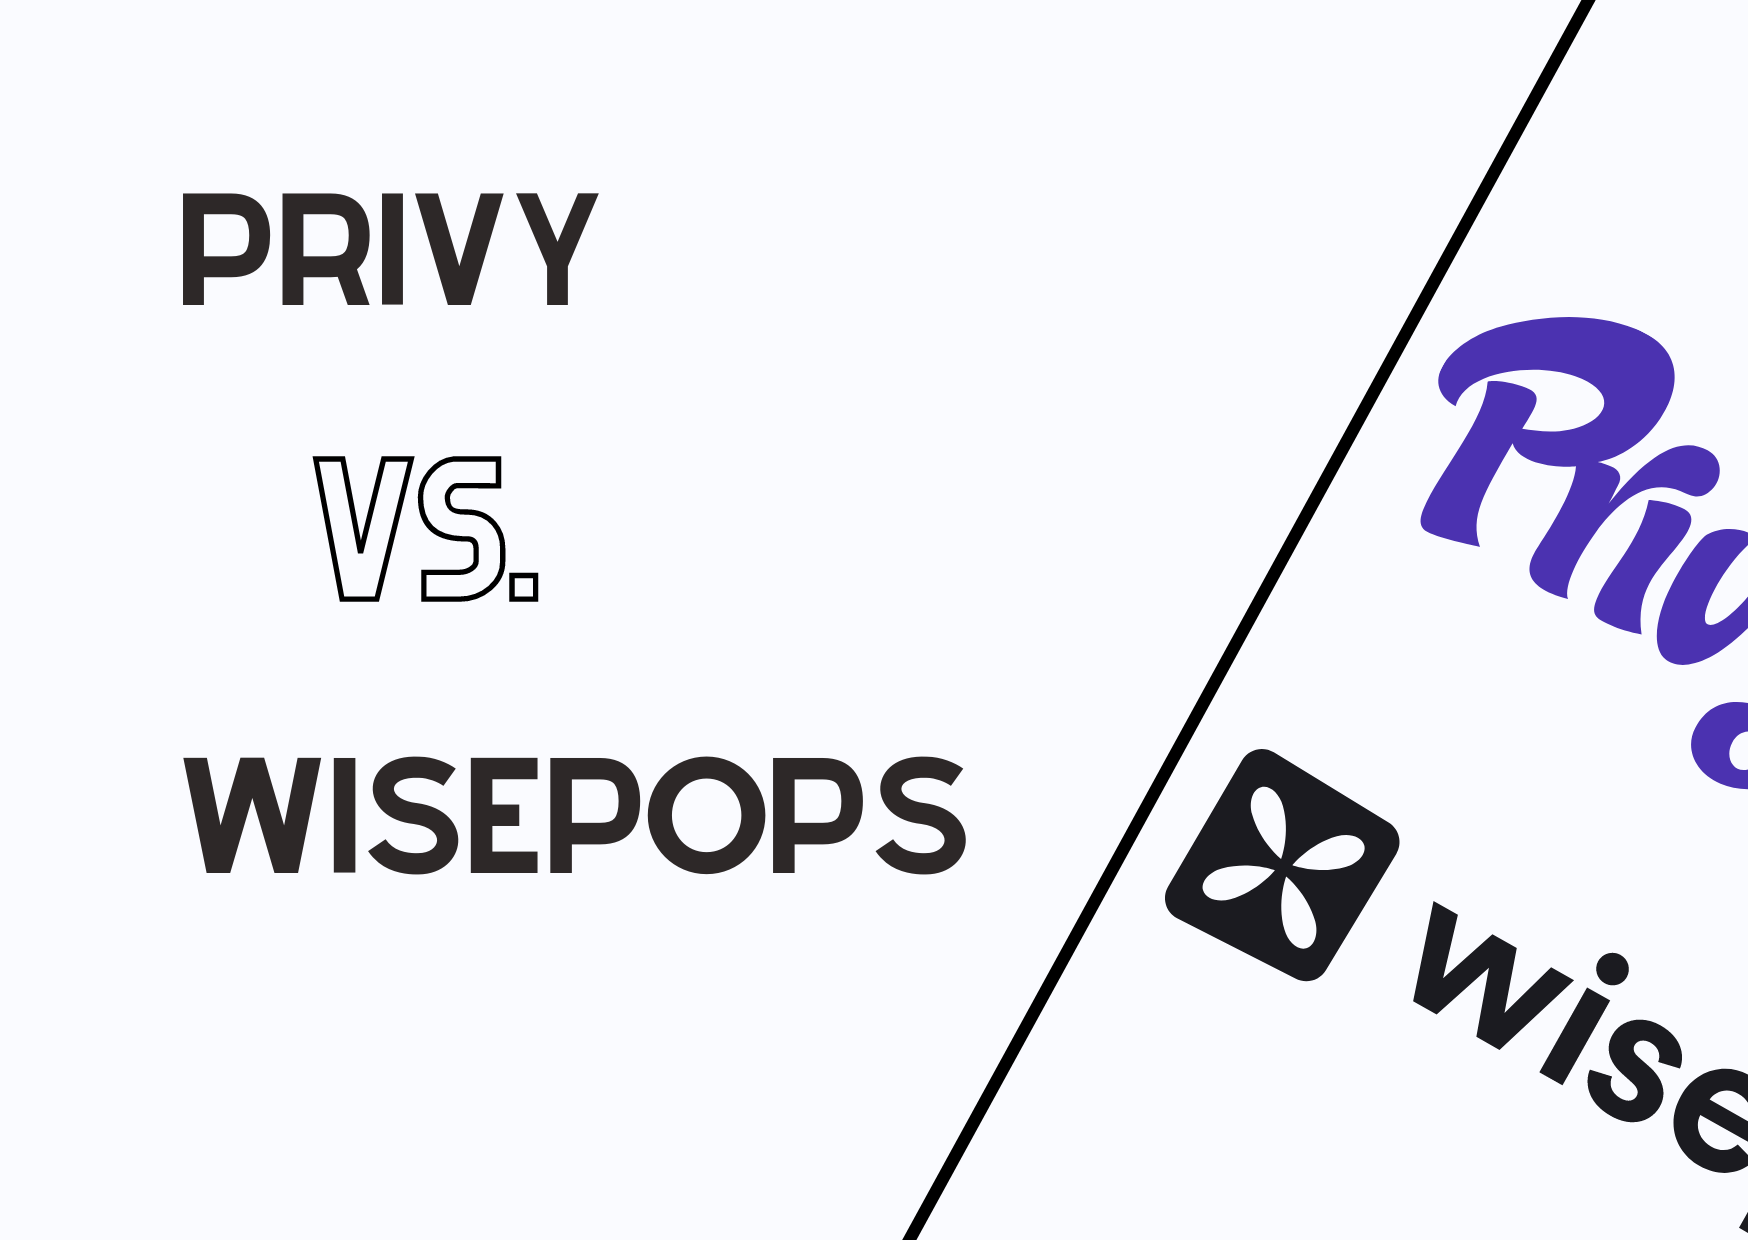 the banner of Privy and Wisepops comparison with details